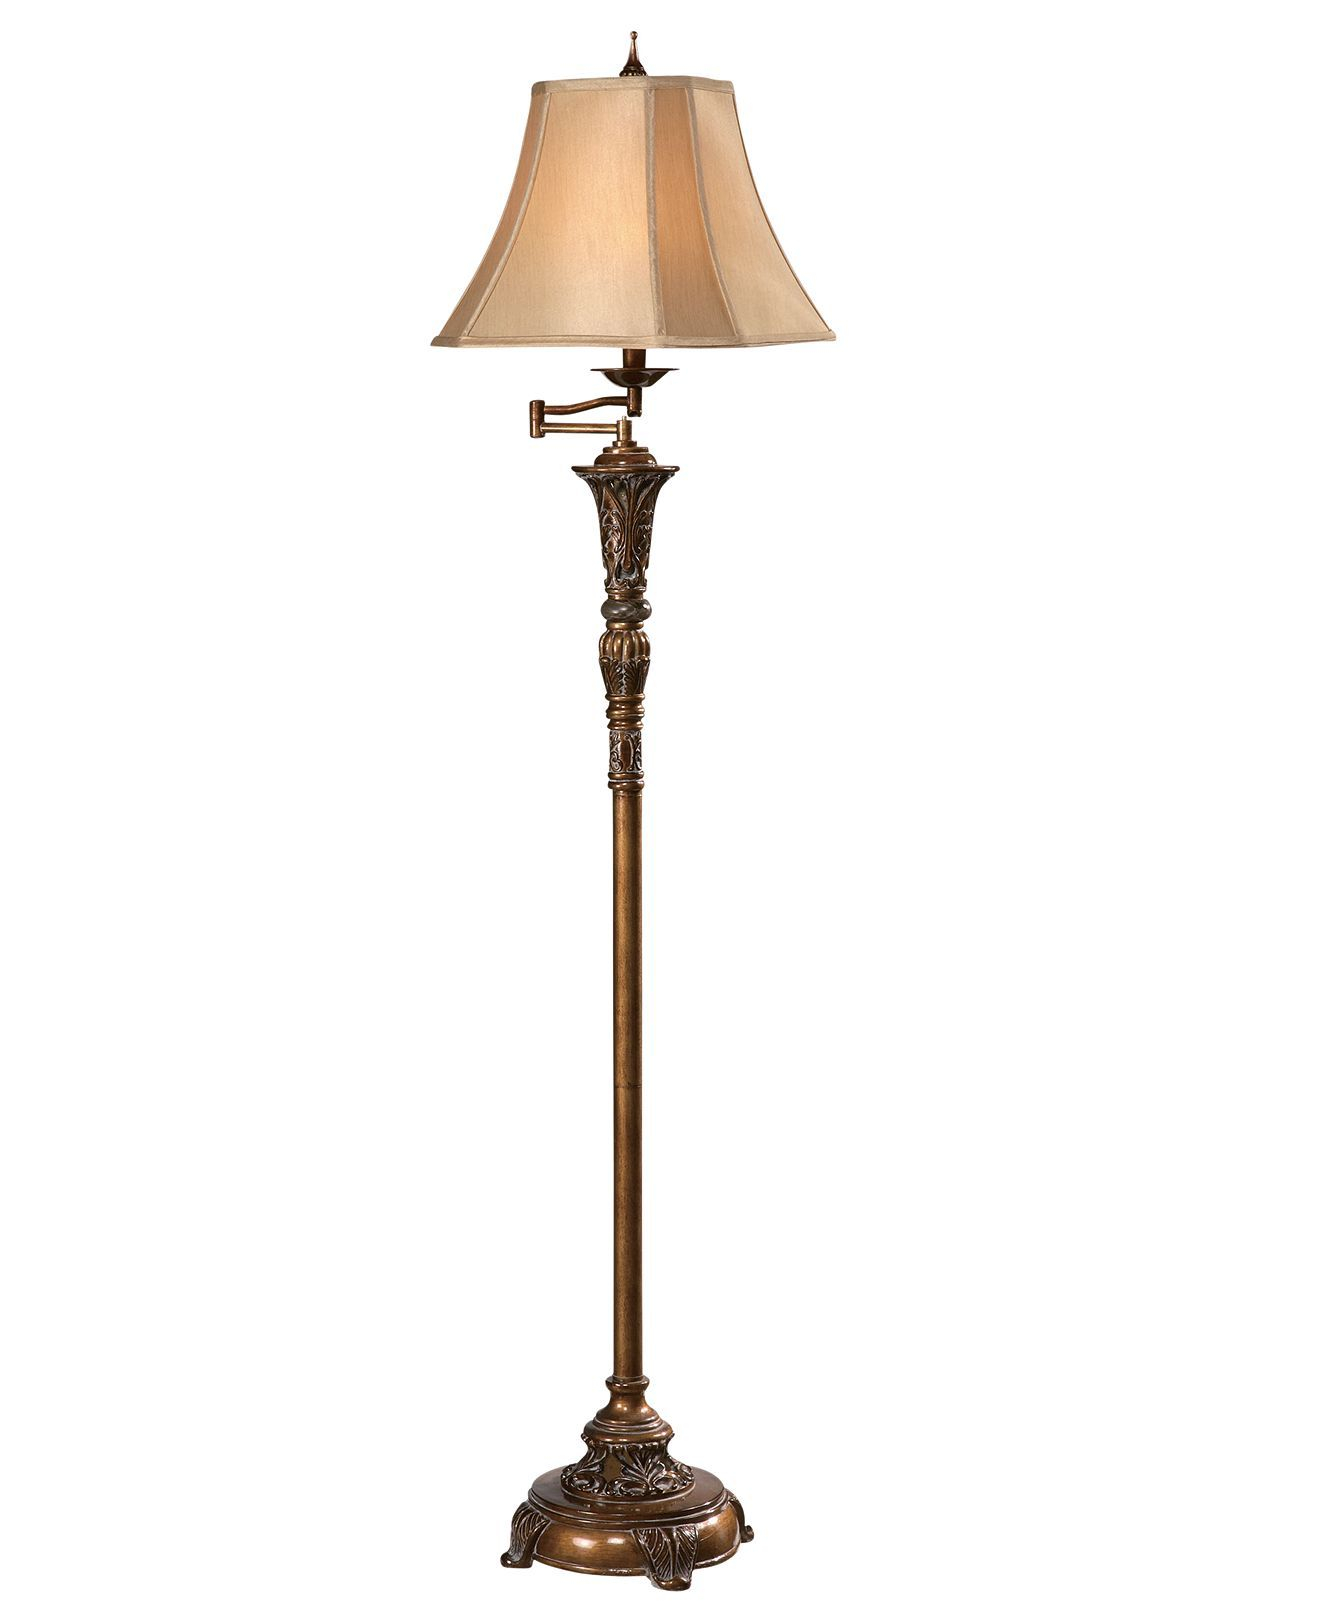 Crestview Floor Lamp London Avenue Floor Lamps For The within dimensions 1320 X 1616